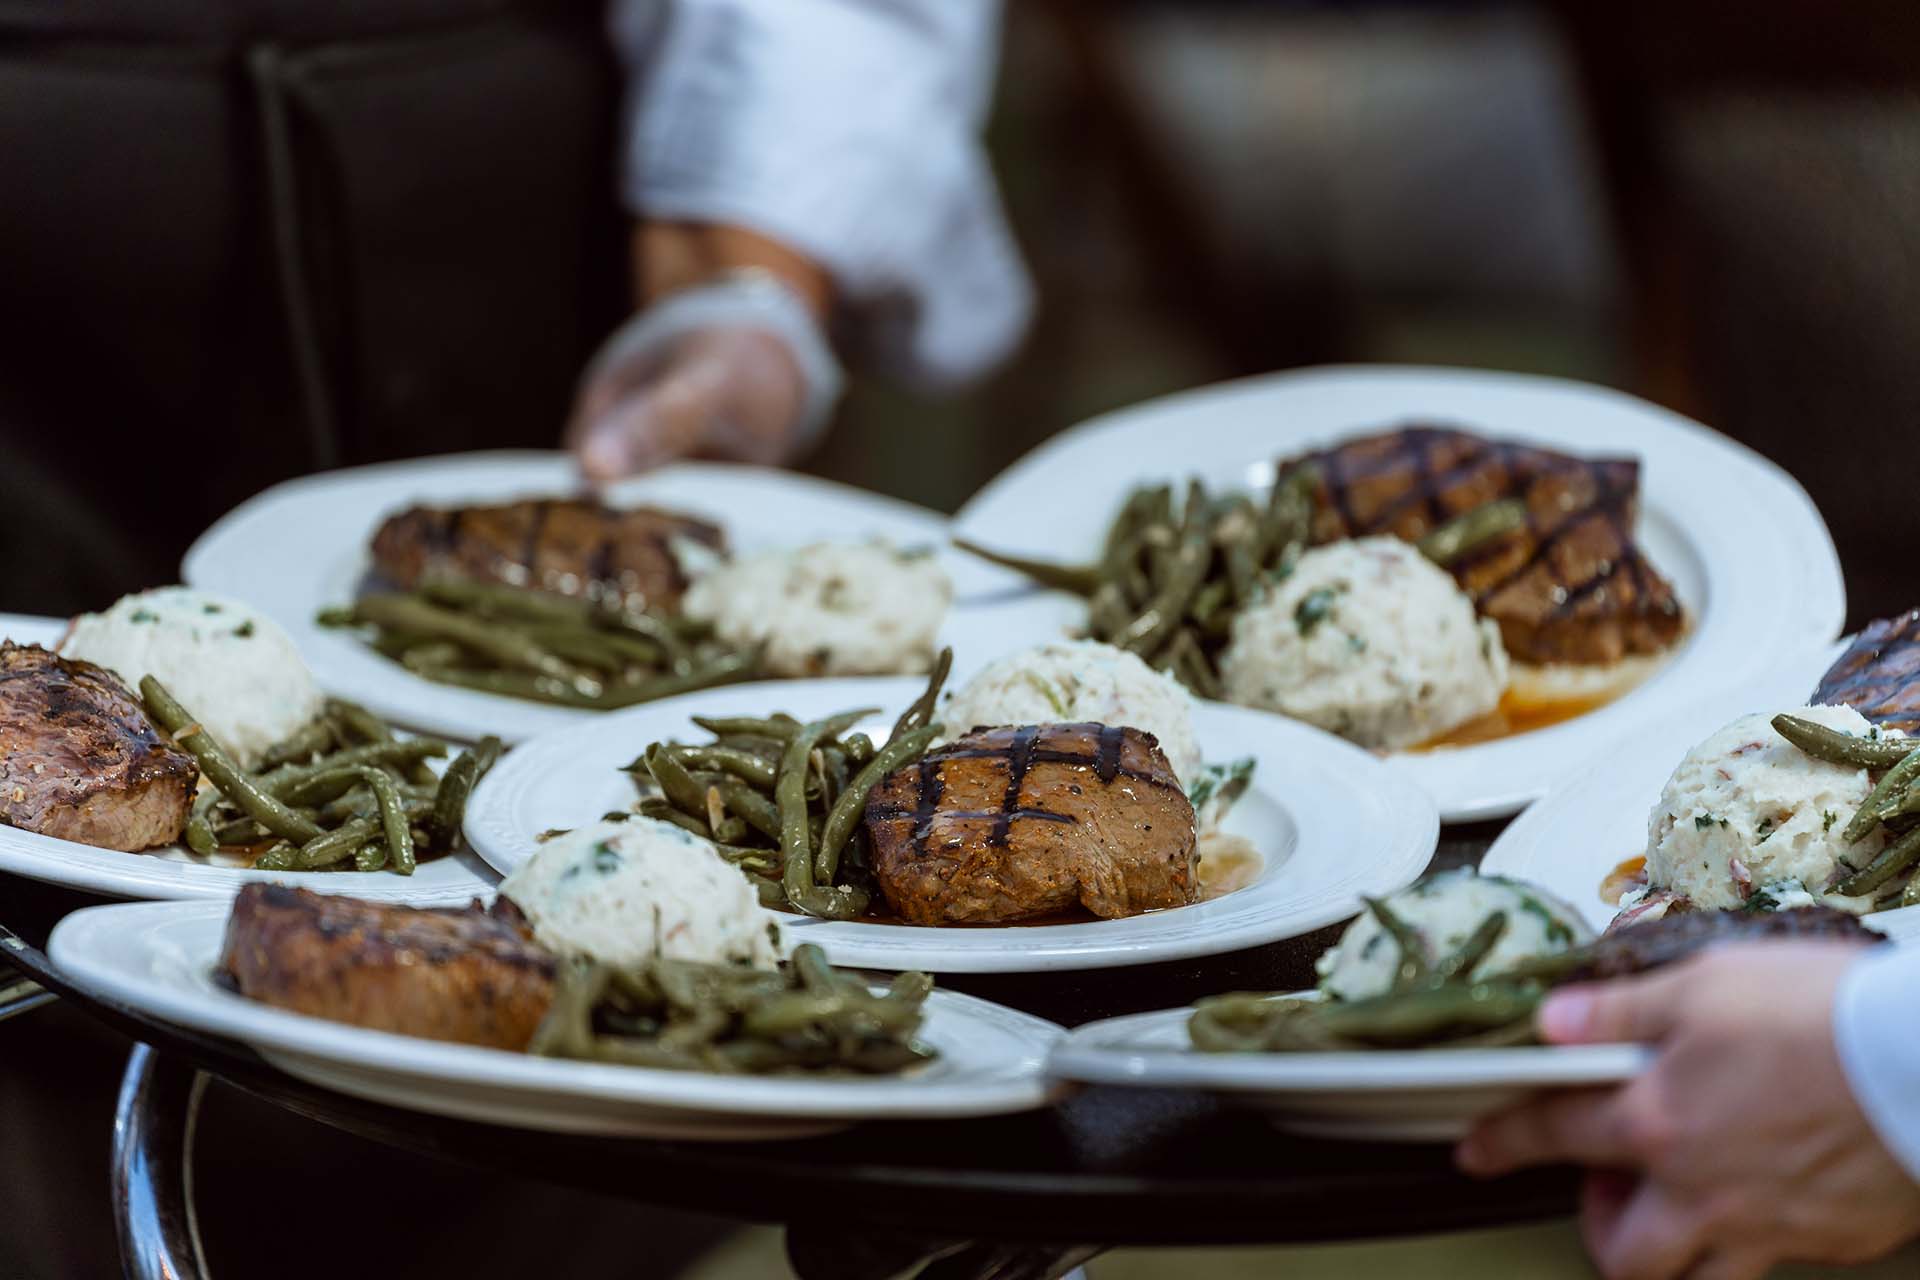 A catering staff member carries a large platter filled with dinner plates, serving up thick steaks with defined grill marks, mashed potatoes, and green beans.